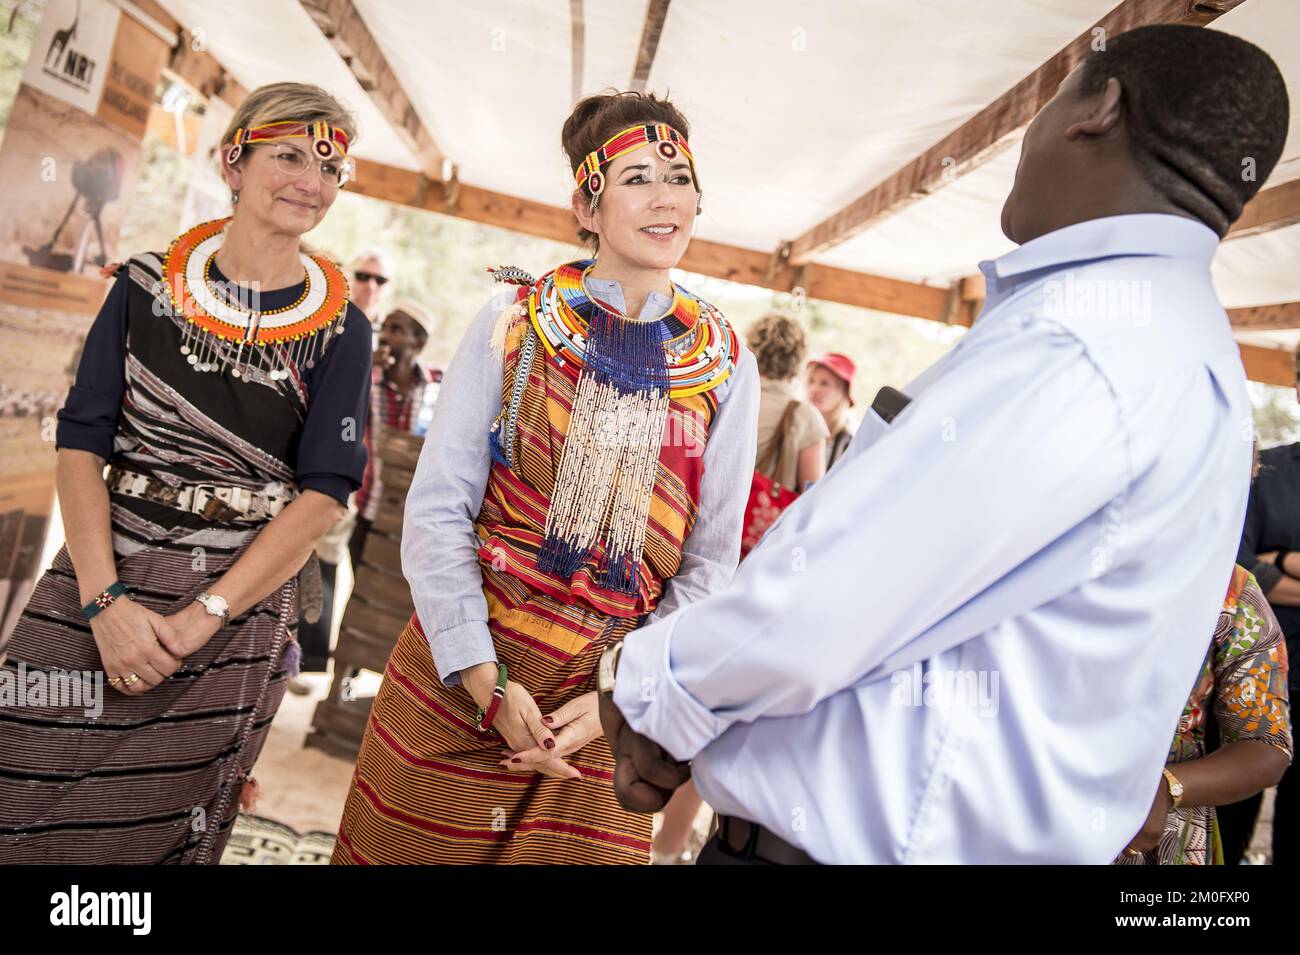 On November 27th and 28th 2018 HRH Crown Princess Mary visited Kalama in Kenya along with the Minister for Development Ulla Tornaess. They arrived at the Kalama Airstrip in Samburu Country on November 27th and were greeted by prominent members of the Kalama societies. Hereafter they visited the Kalama Conservancy where they met with local women who have benefited from Danish support to create small sustainable businesses. The whole visit has as a special focus the promotion of women's rights and economic independence through local projects Stock Photo